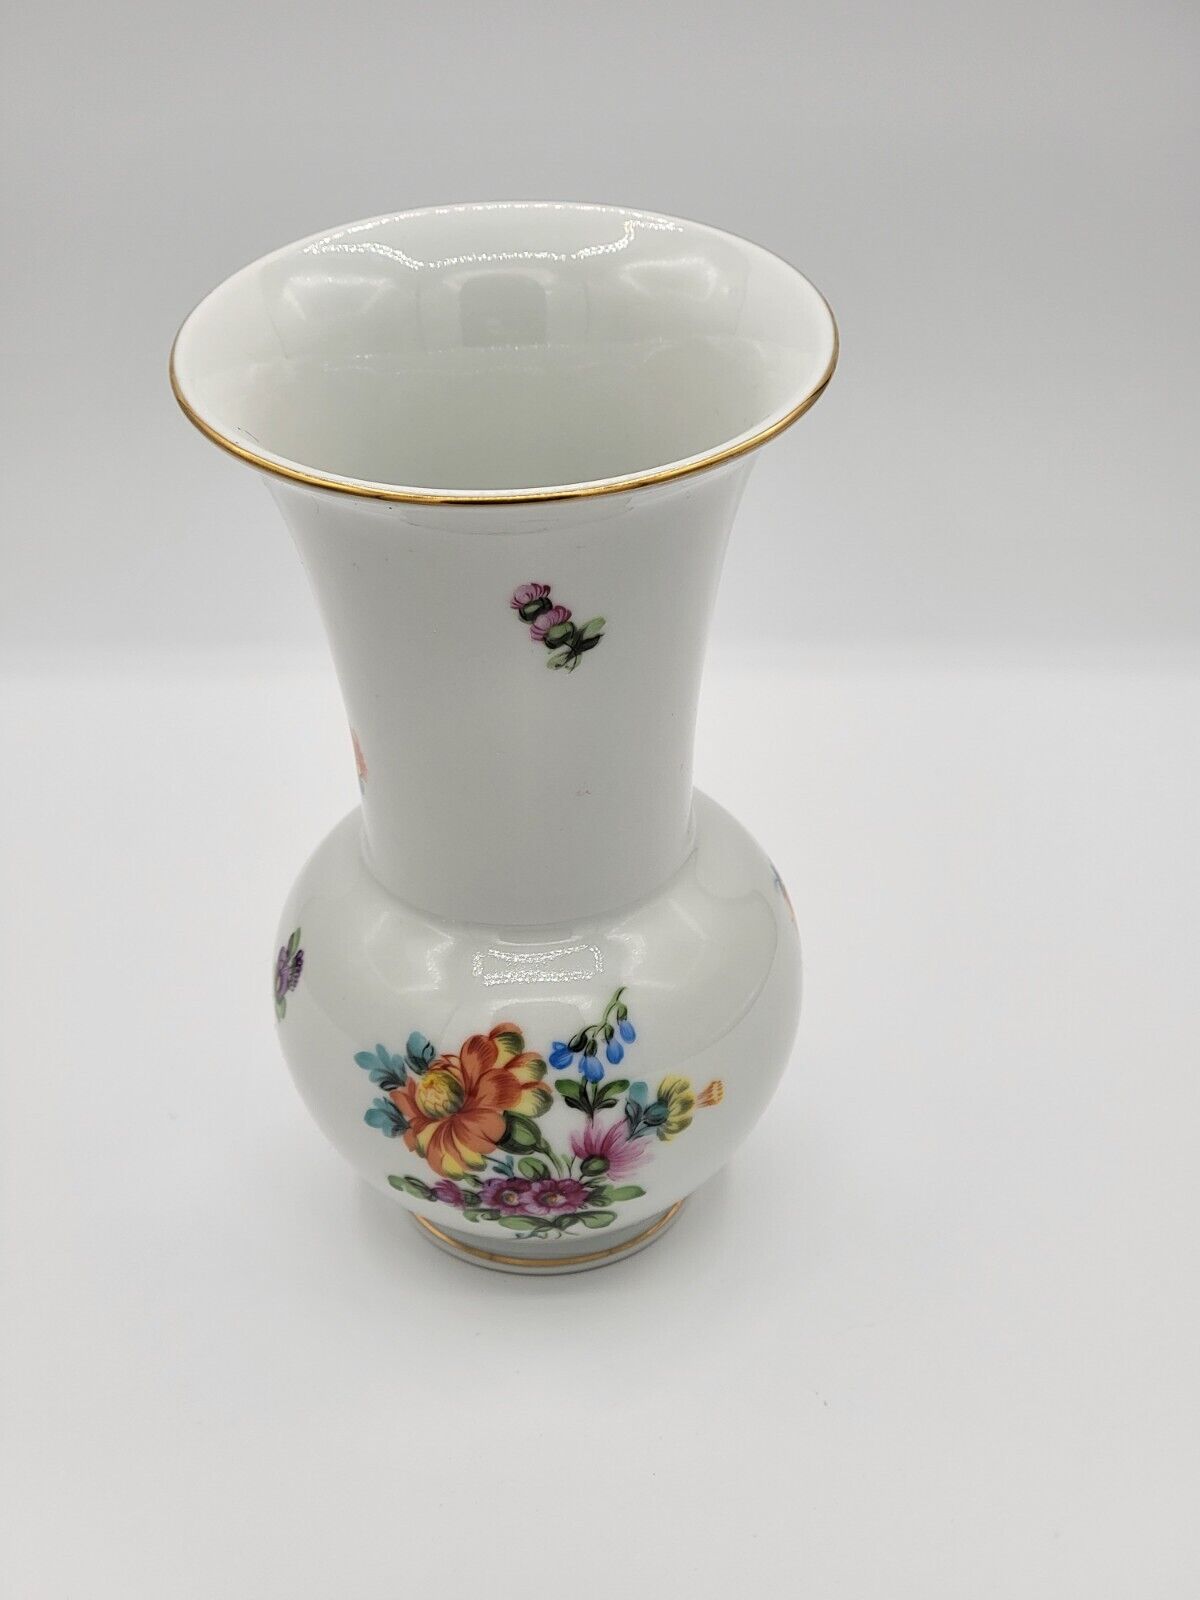 Herend Hungary porcelain vase hand-painted floral 6 1/2